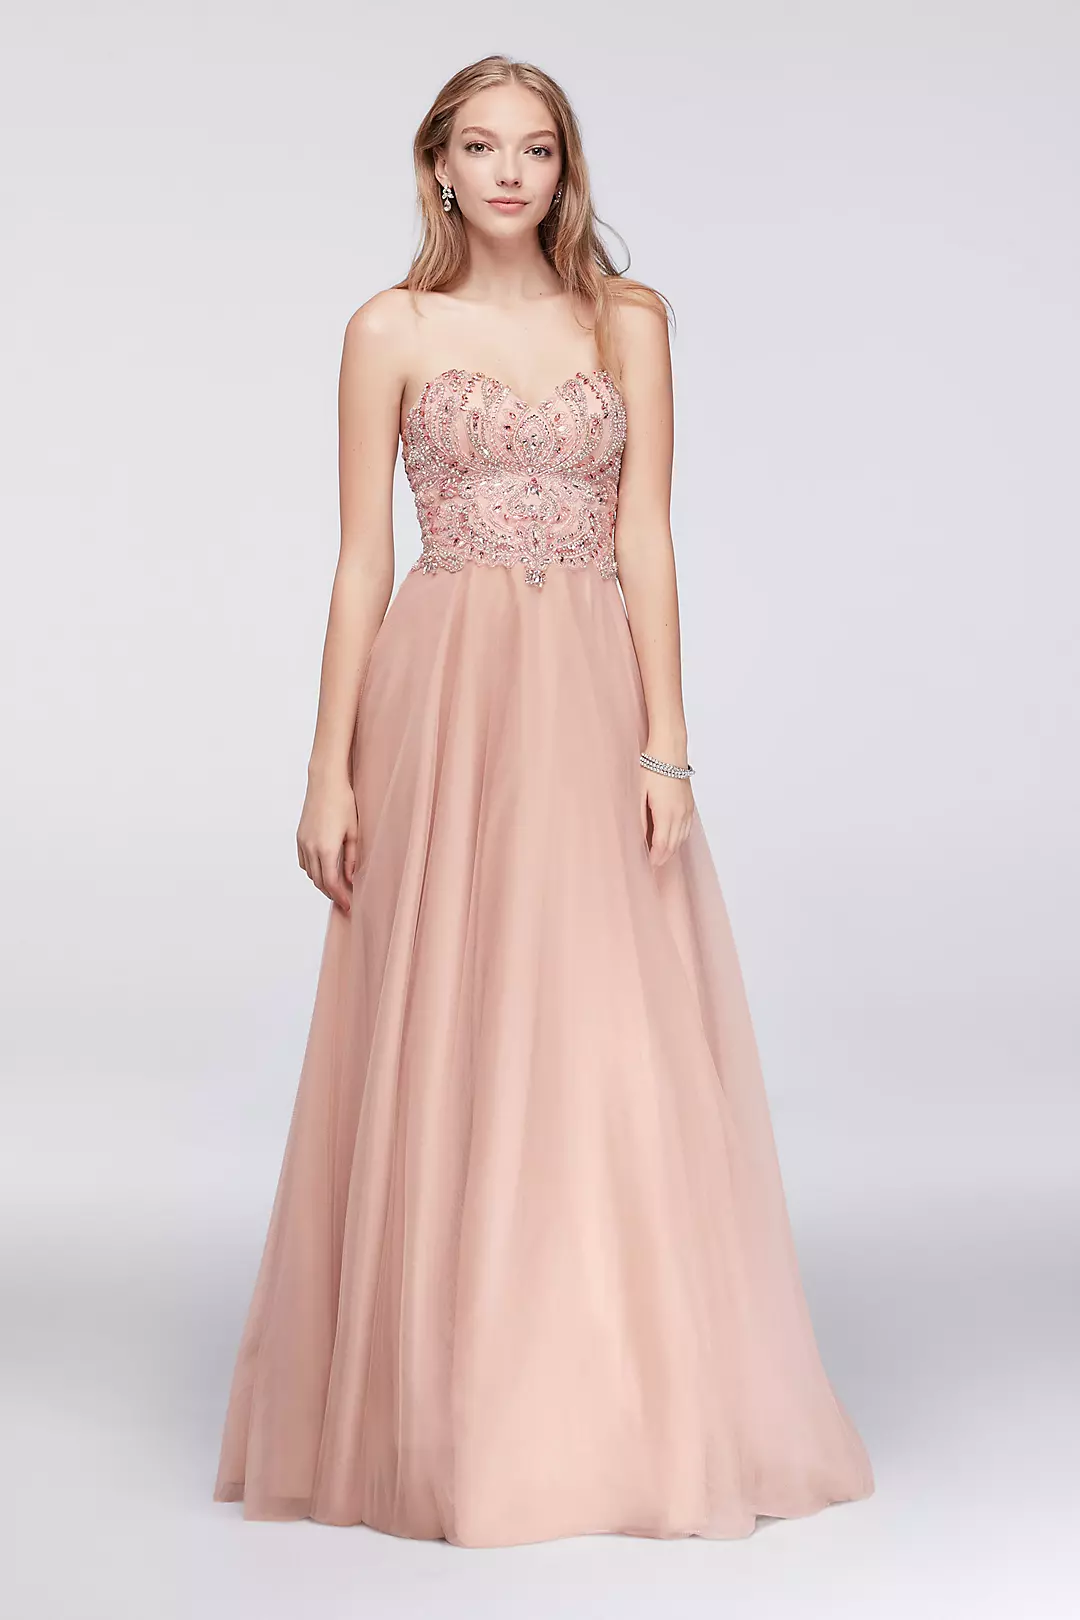 Embellished Tulle Ball Gown with Basque Waist Image